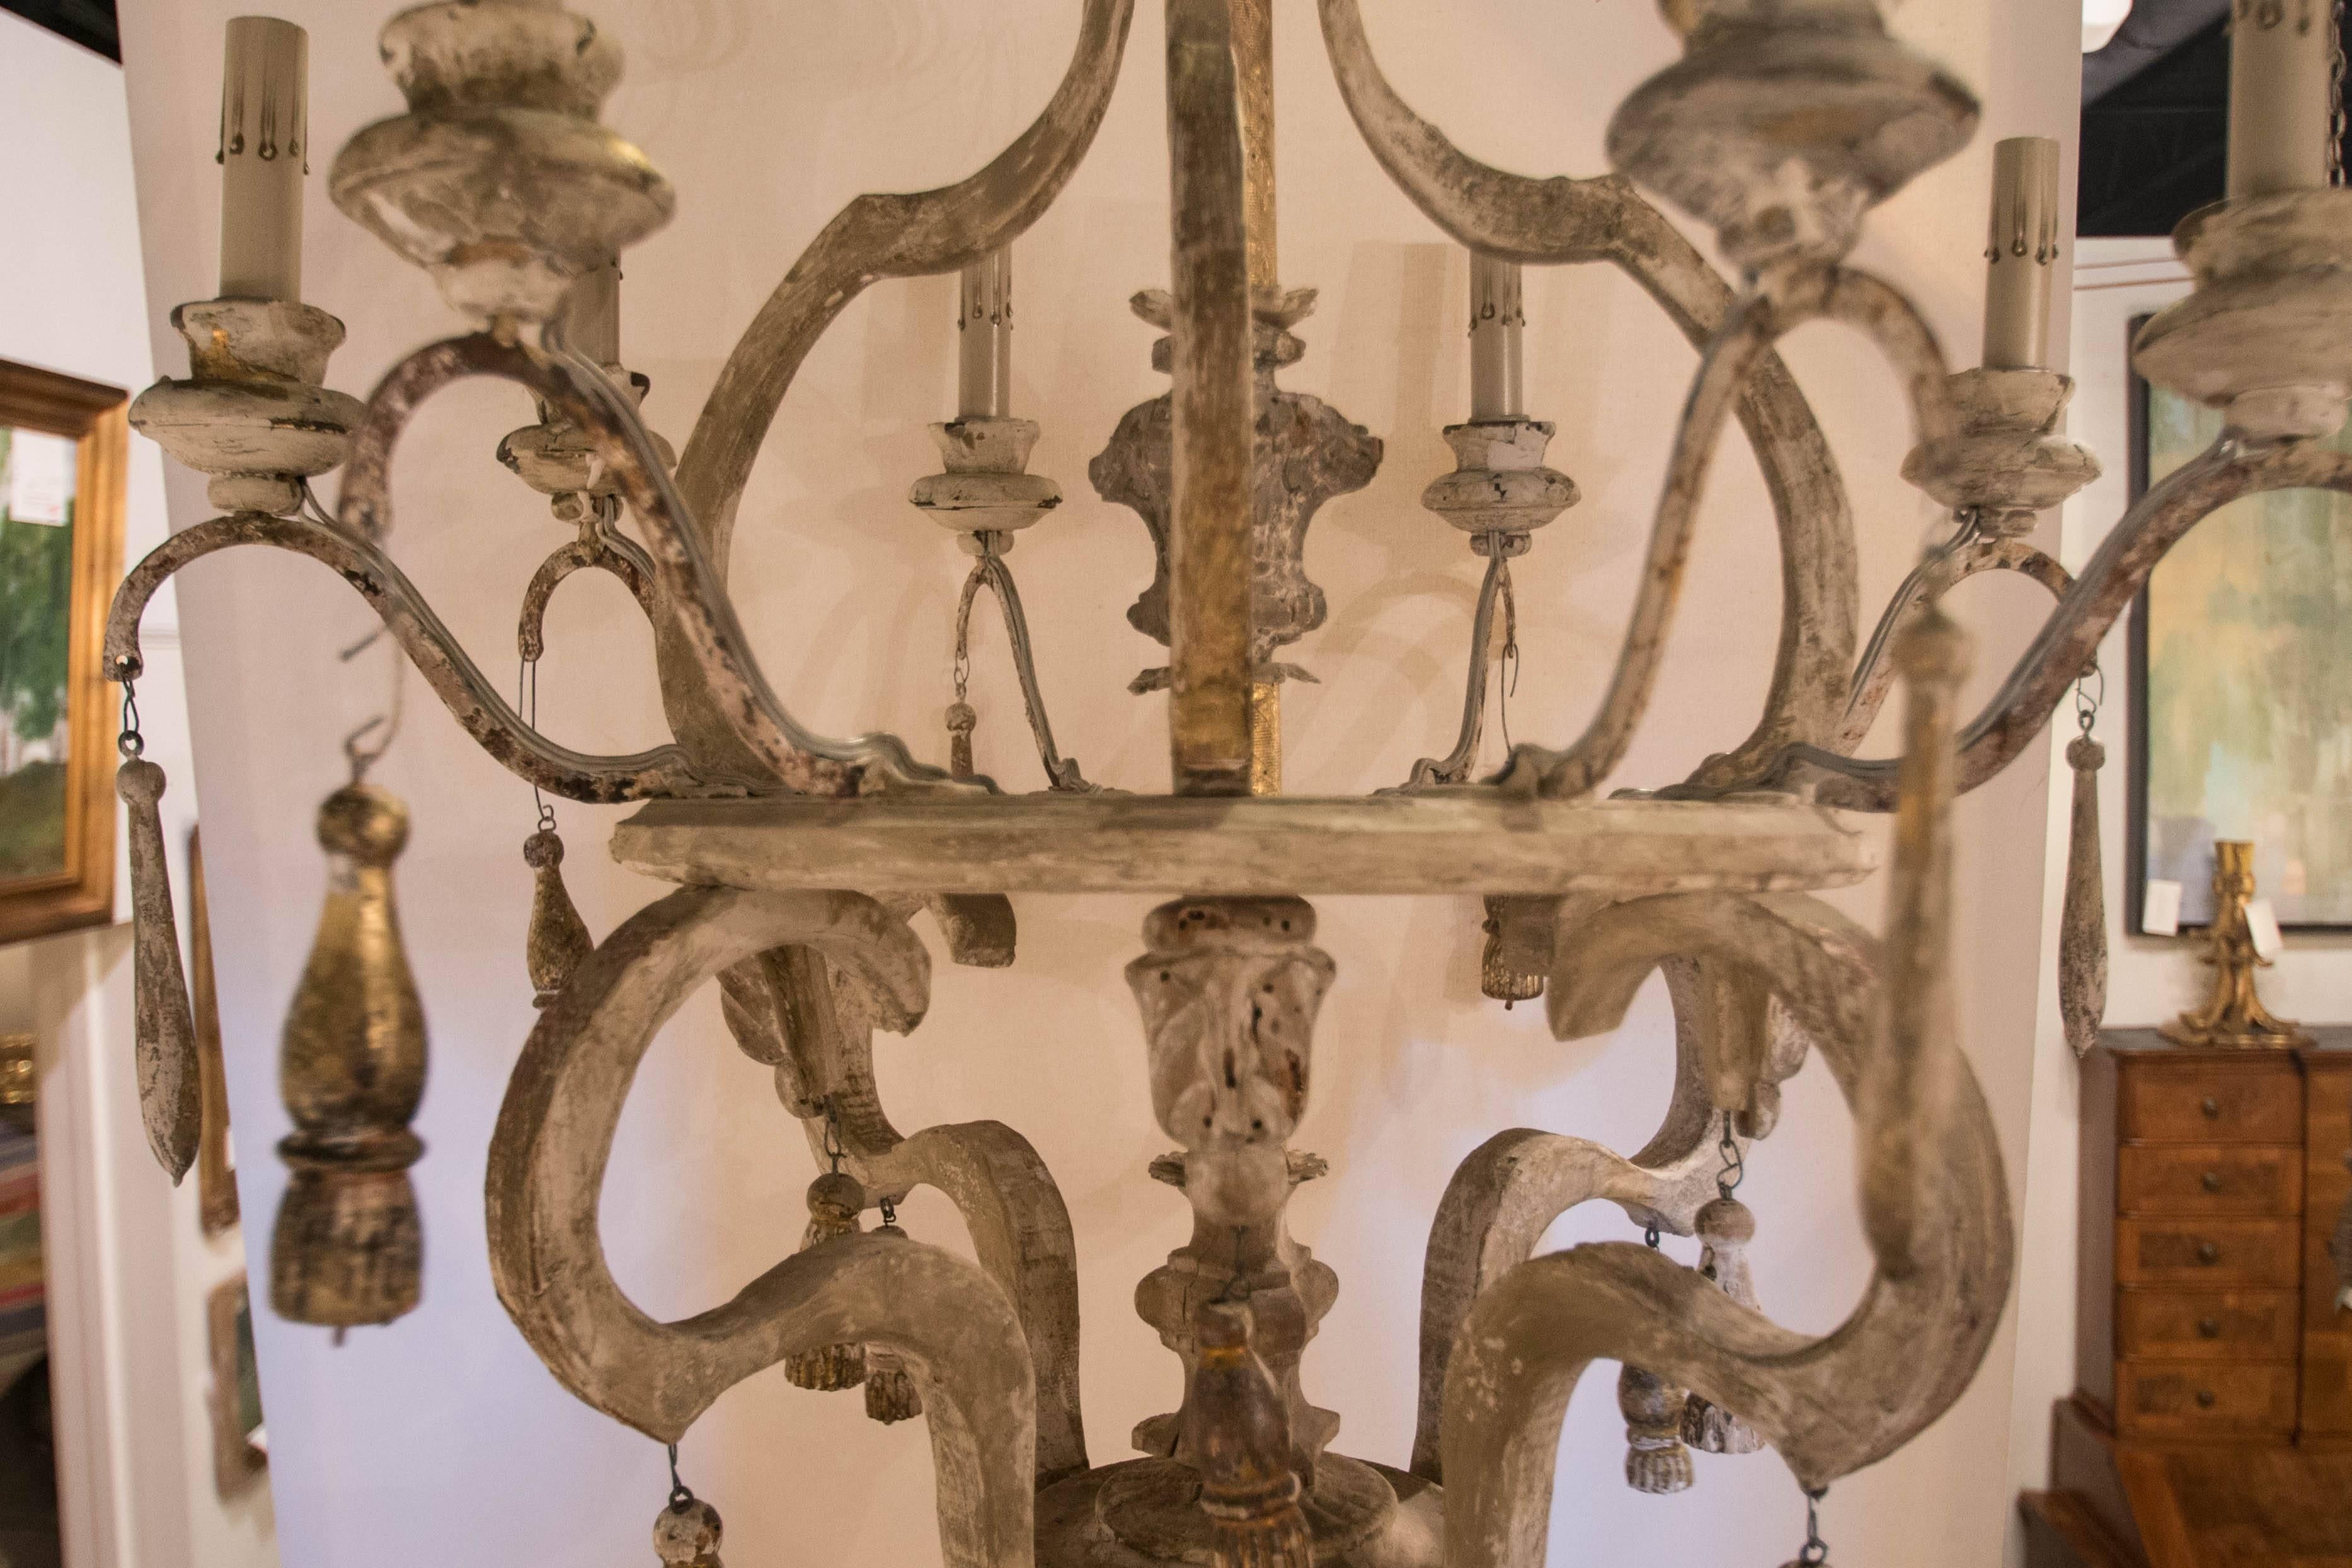 This very unique Italian chandelier is made mostly from 19th century parts and has been wired for American use. This chandelier features eight iron arms with a lovely creamy painted finish. The tassels are mostly gold leaf. The patina is wonderful